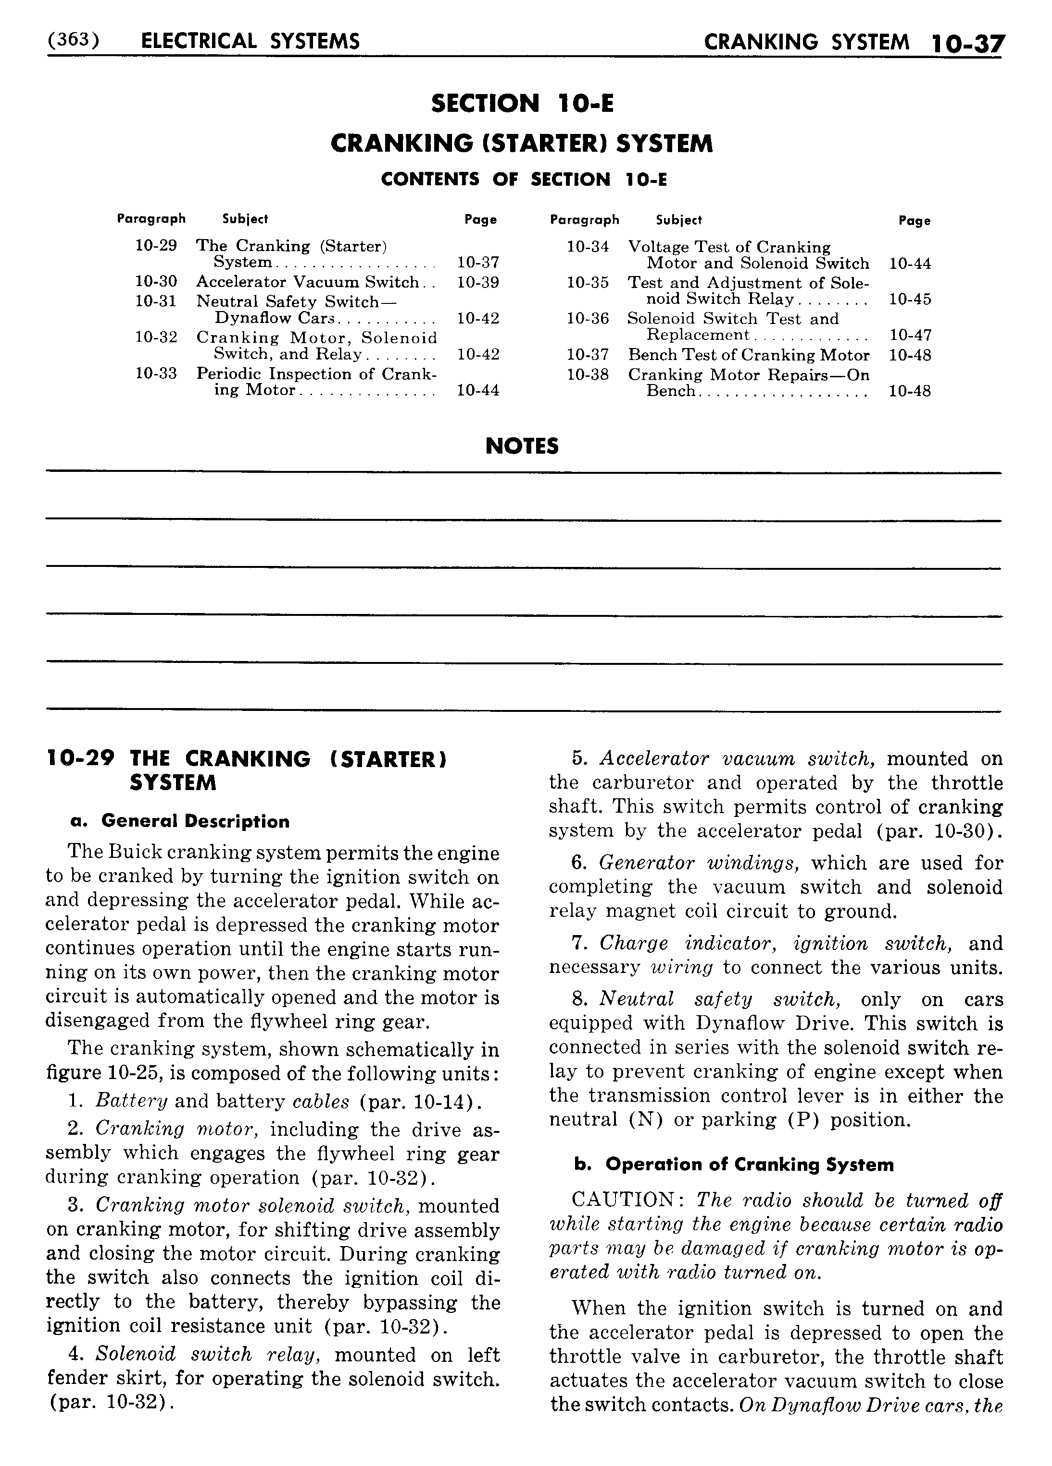 n_11 1956 Buick Shop Manual - Electrical Systems-037-037.jpg